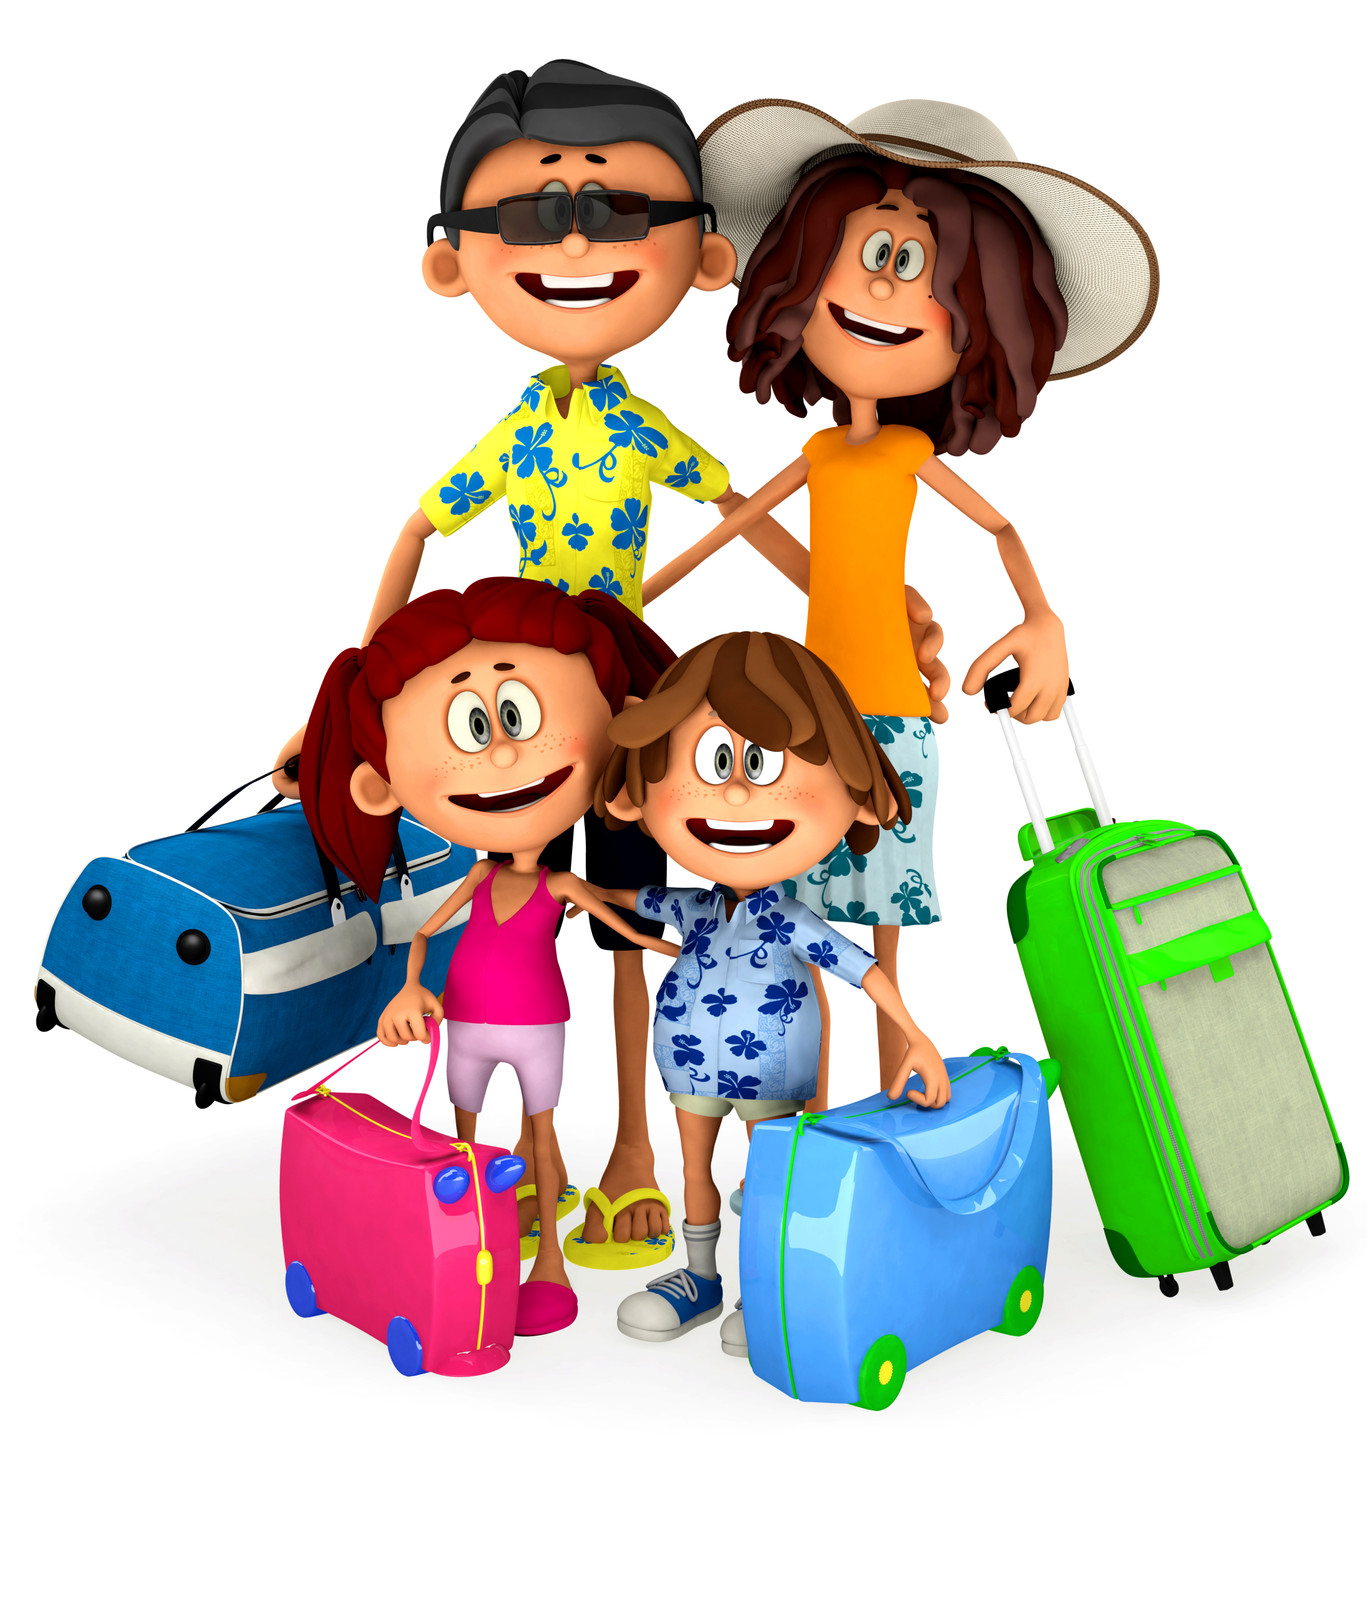 Family Vacation Clip Art - ClipArt Best